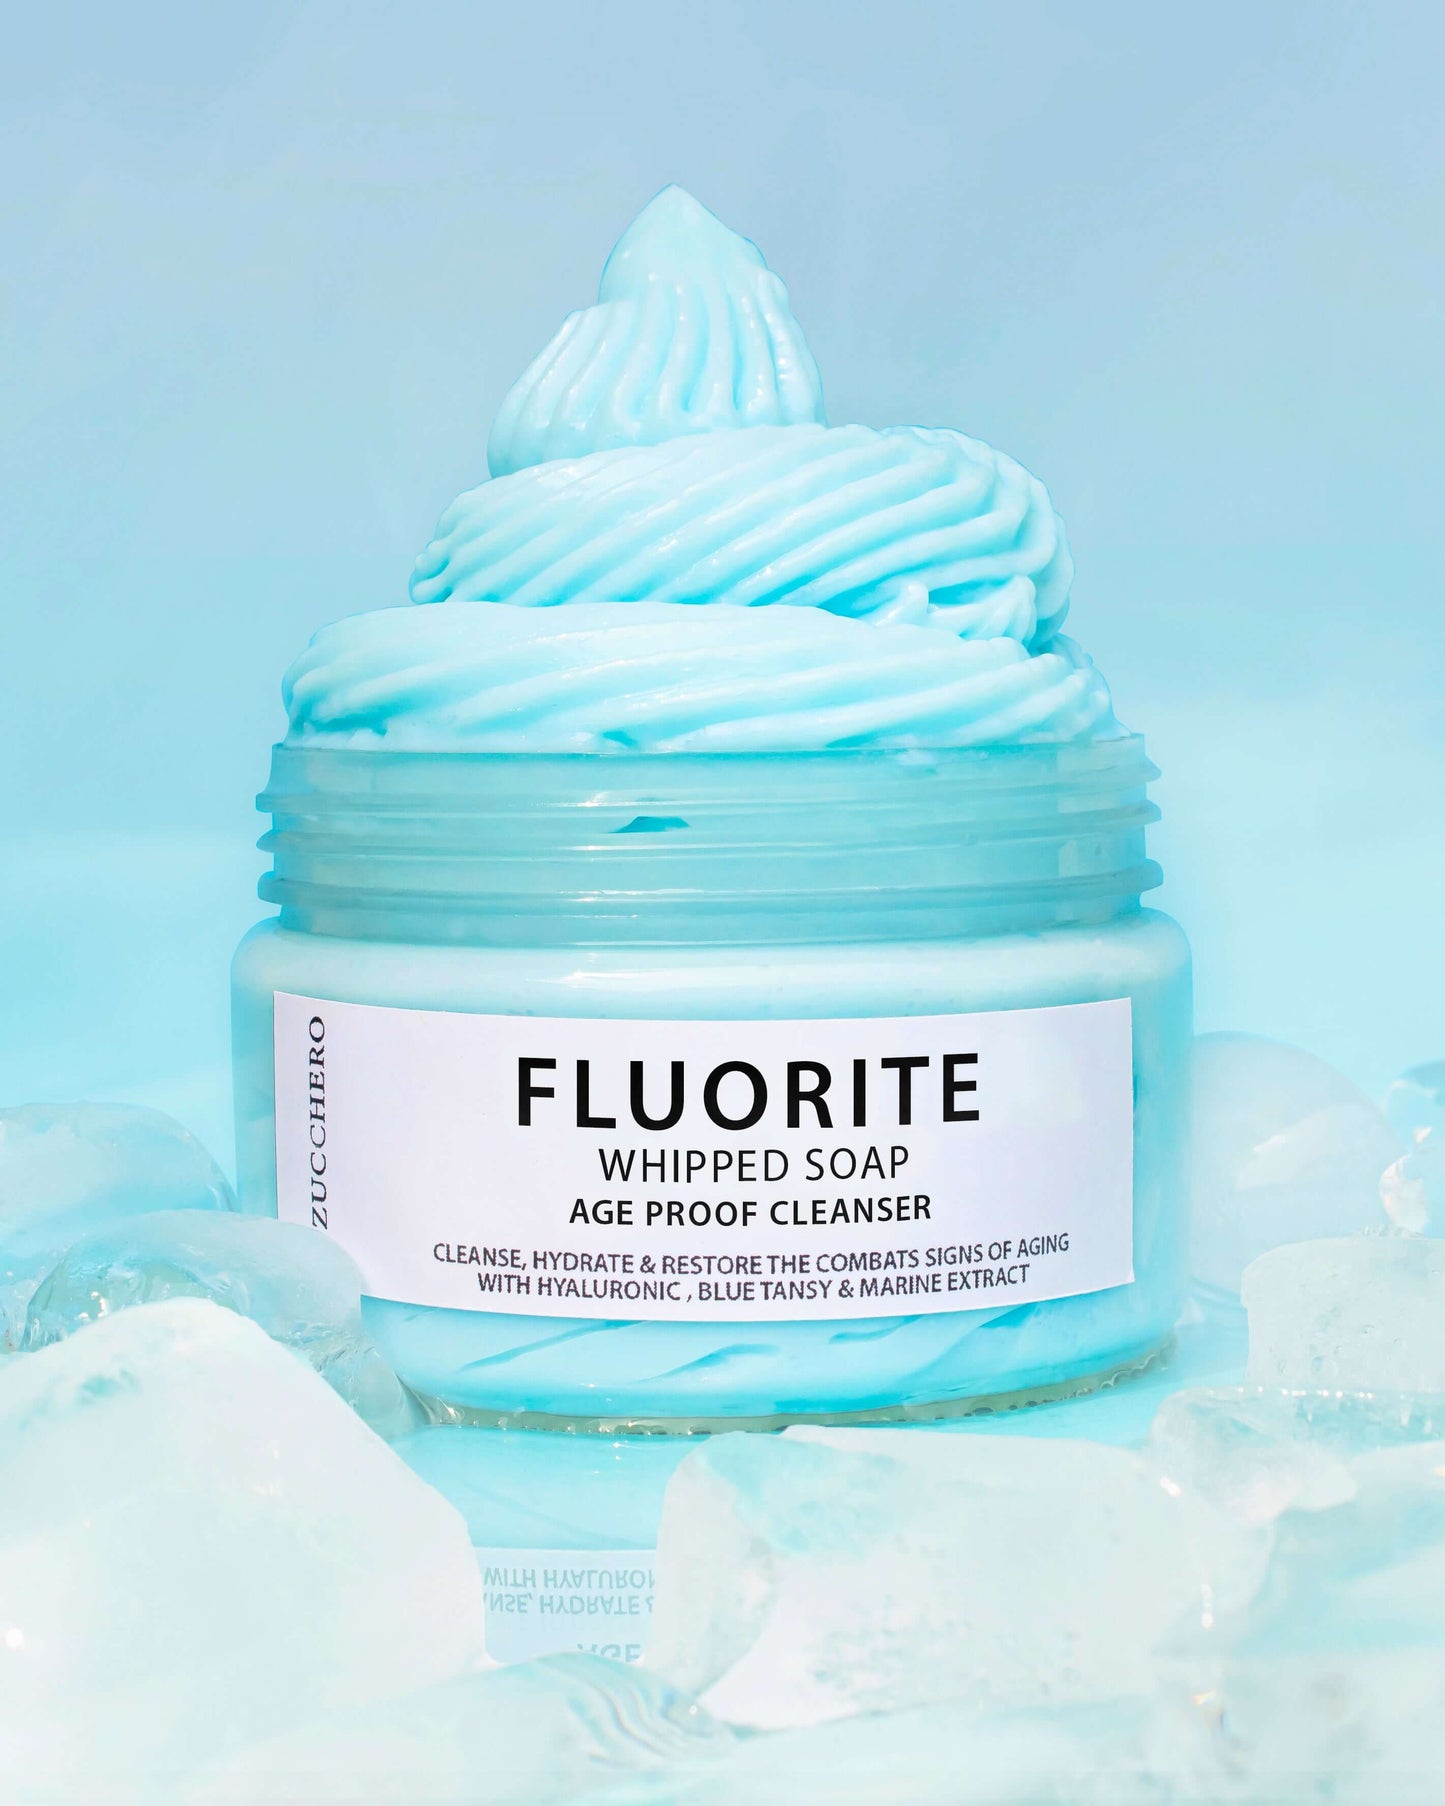 Fluorite Age-Proof Whipped Soap Cleanser